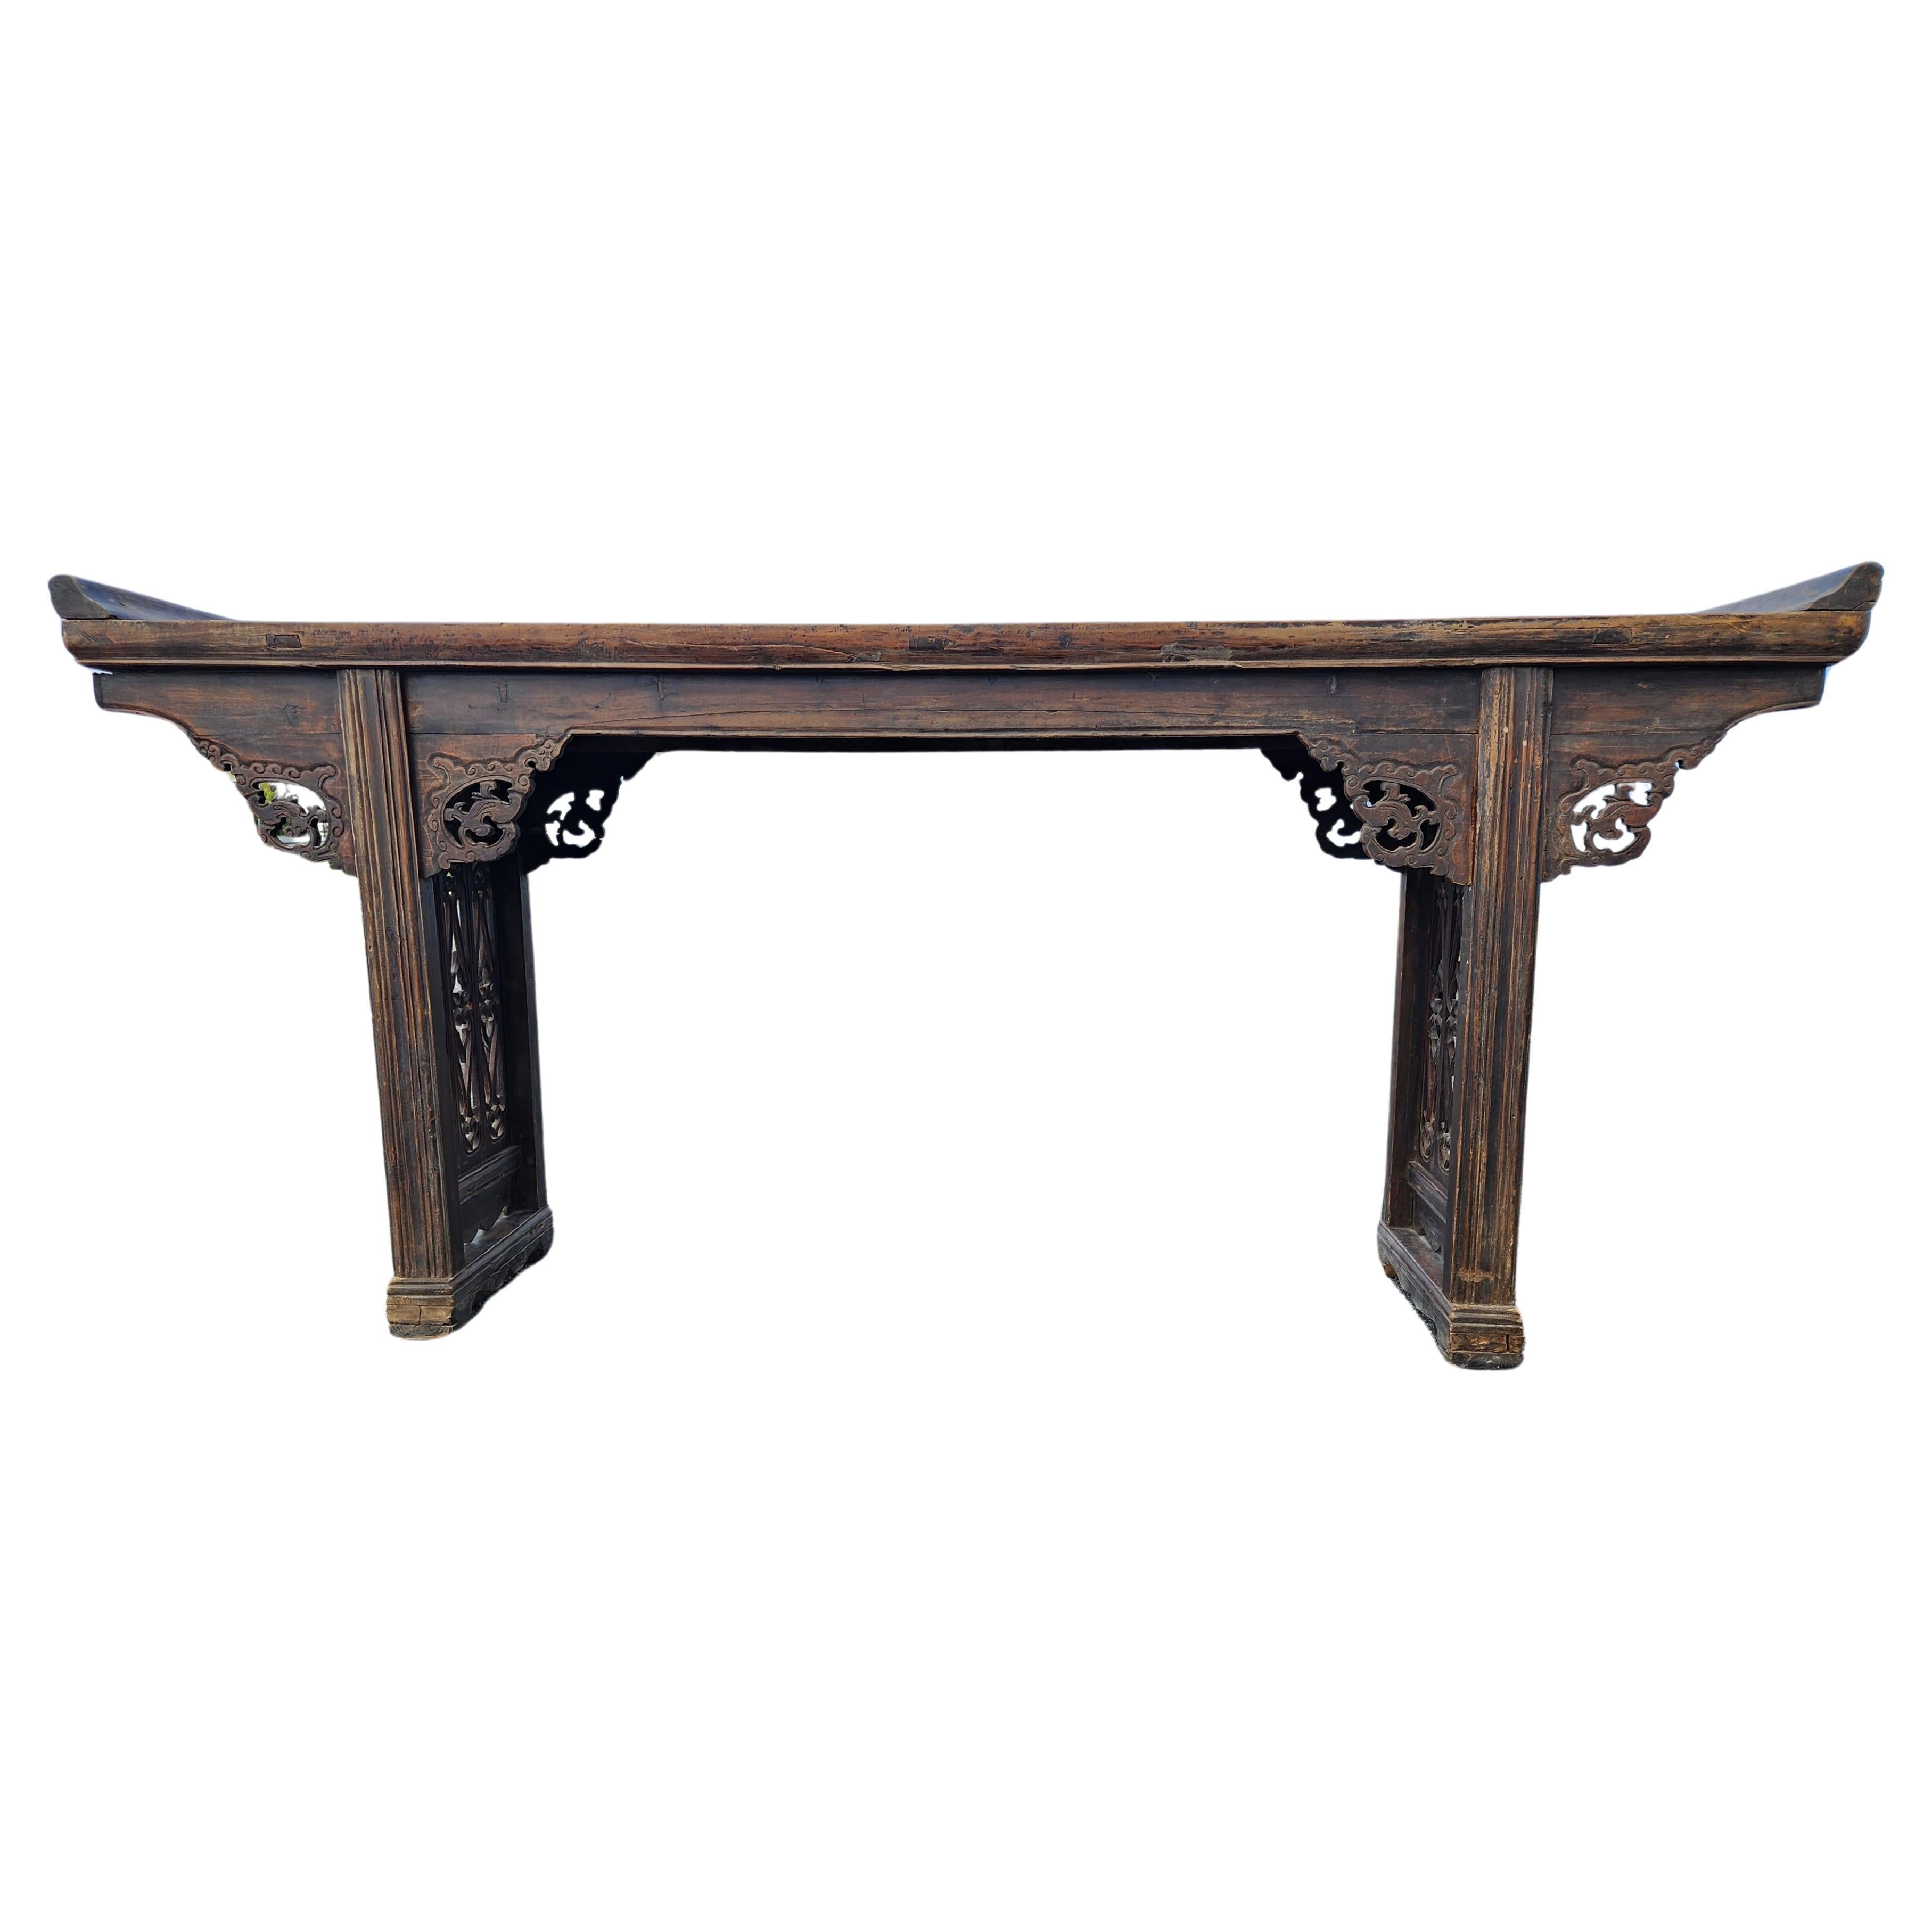 A large elm-wood altar or console table with everted flanges or 'qiaotou' (commonly called 